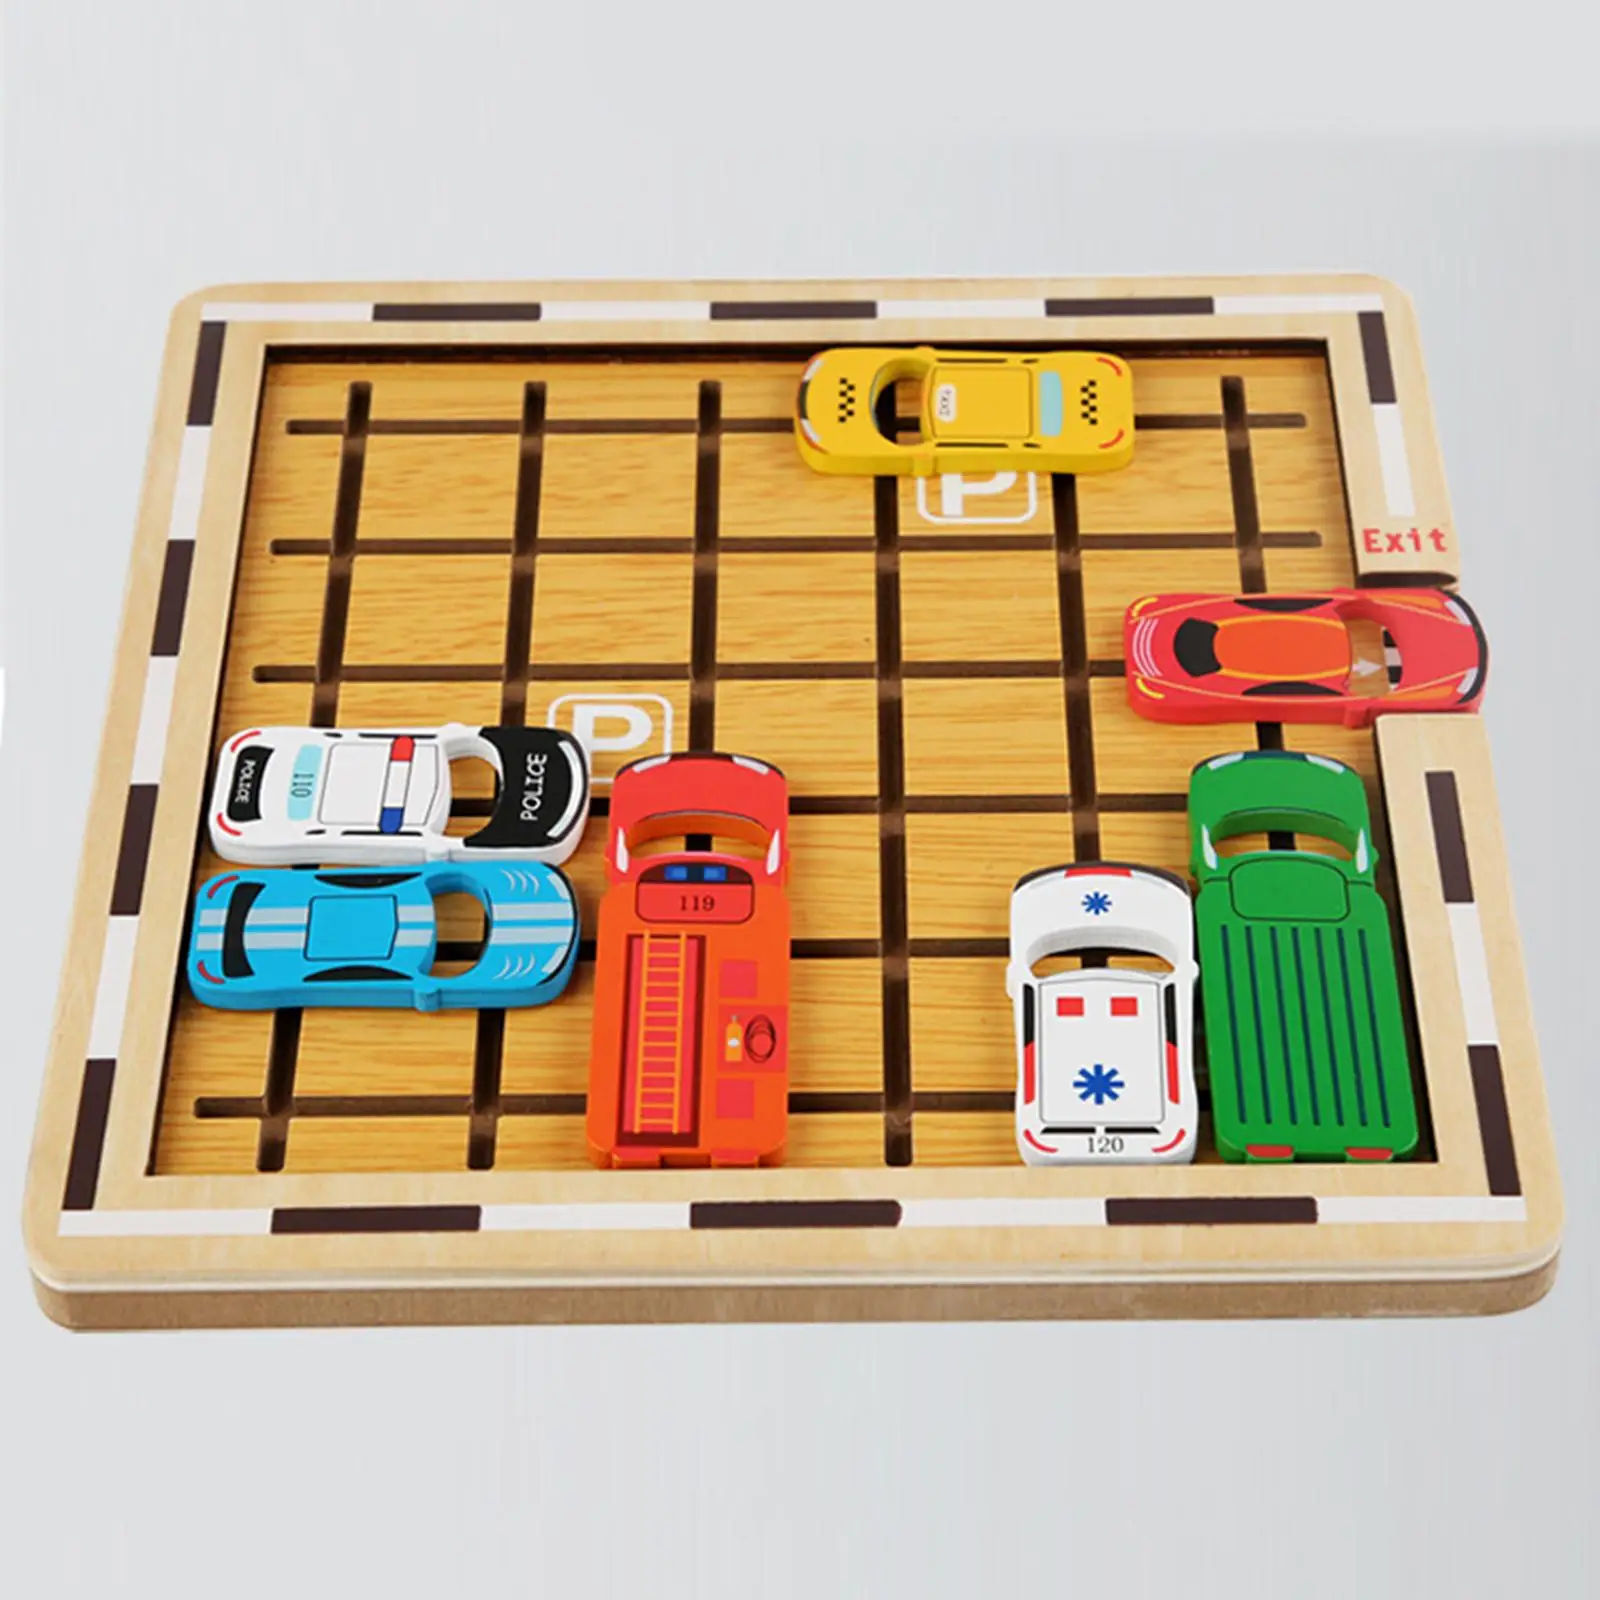 Wooden Early Education Car Educational Toys Sensory Toy Exercise Brain Ability Development for Toddlers Boys Kids Gifts